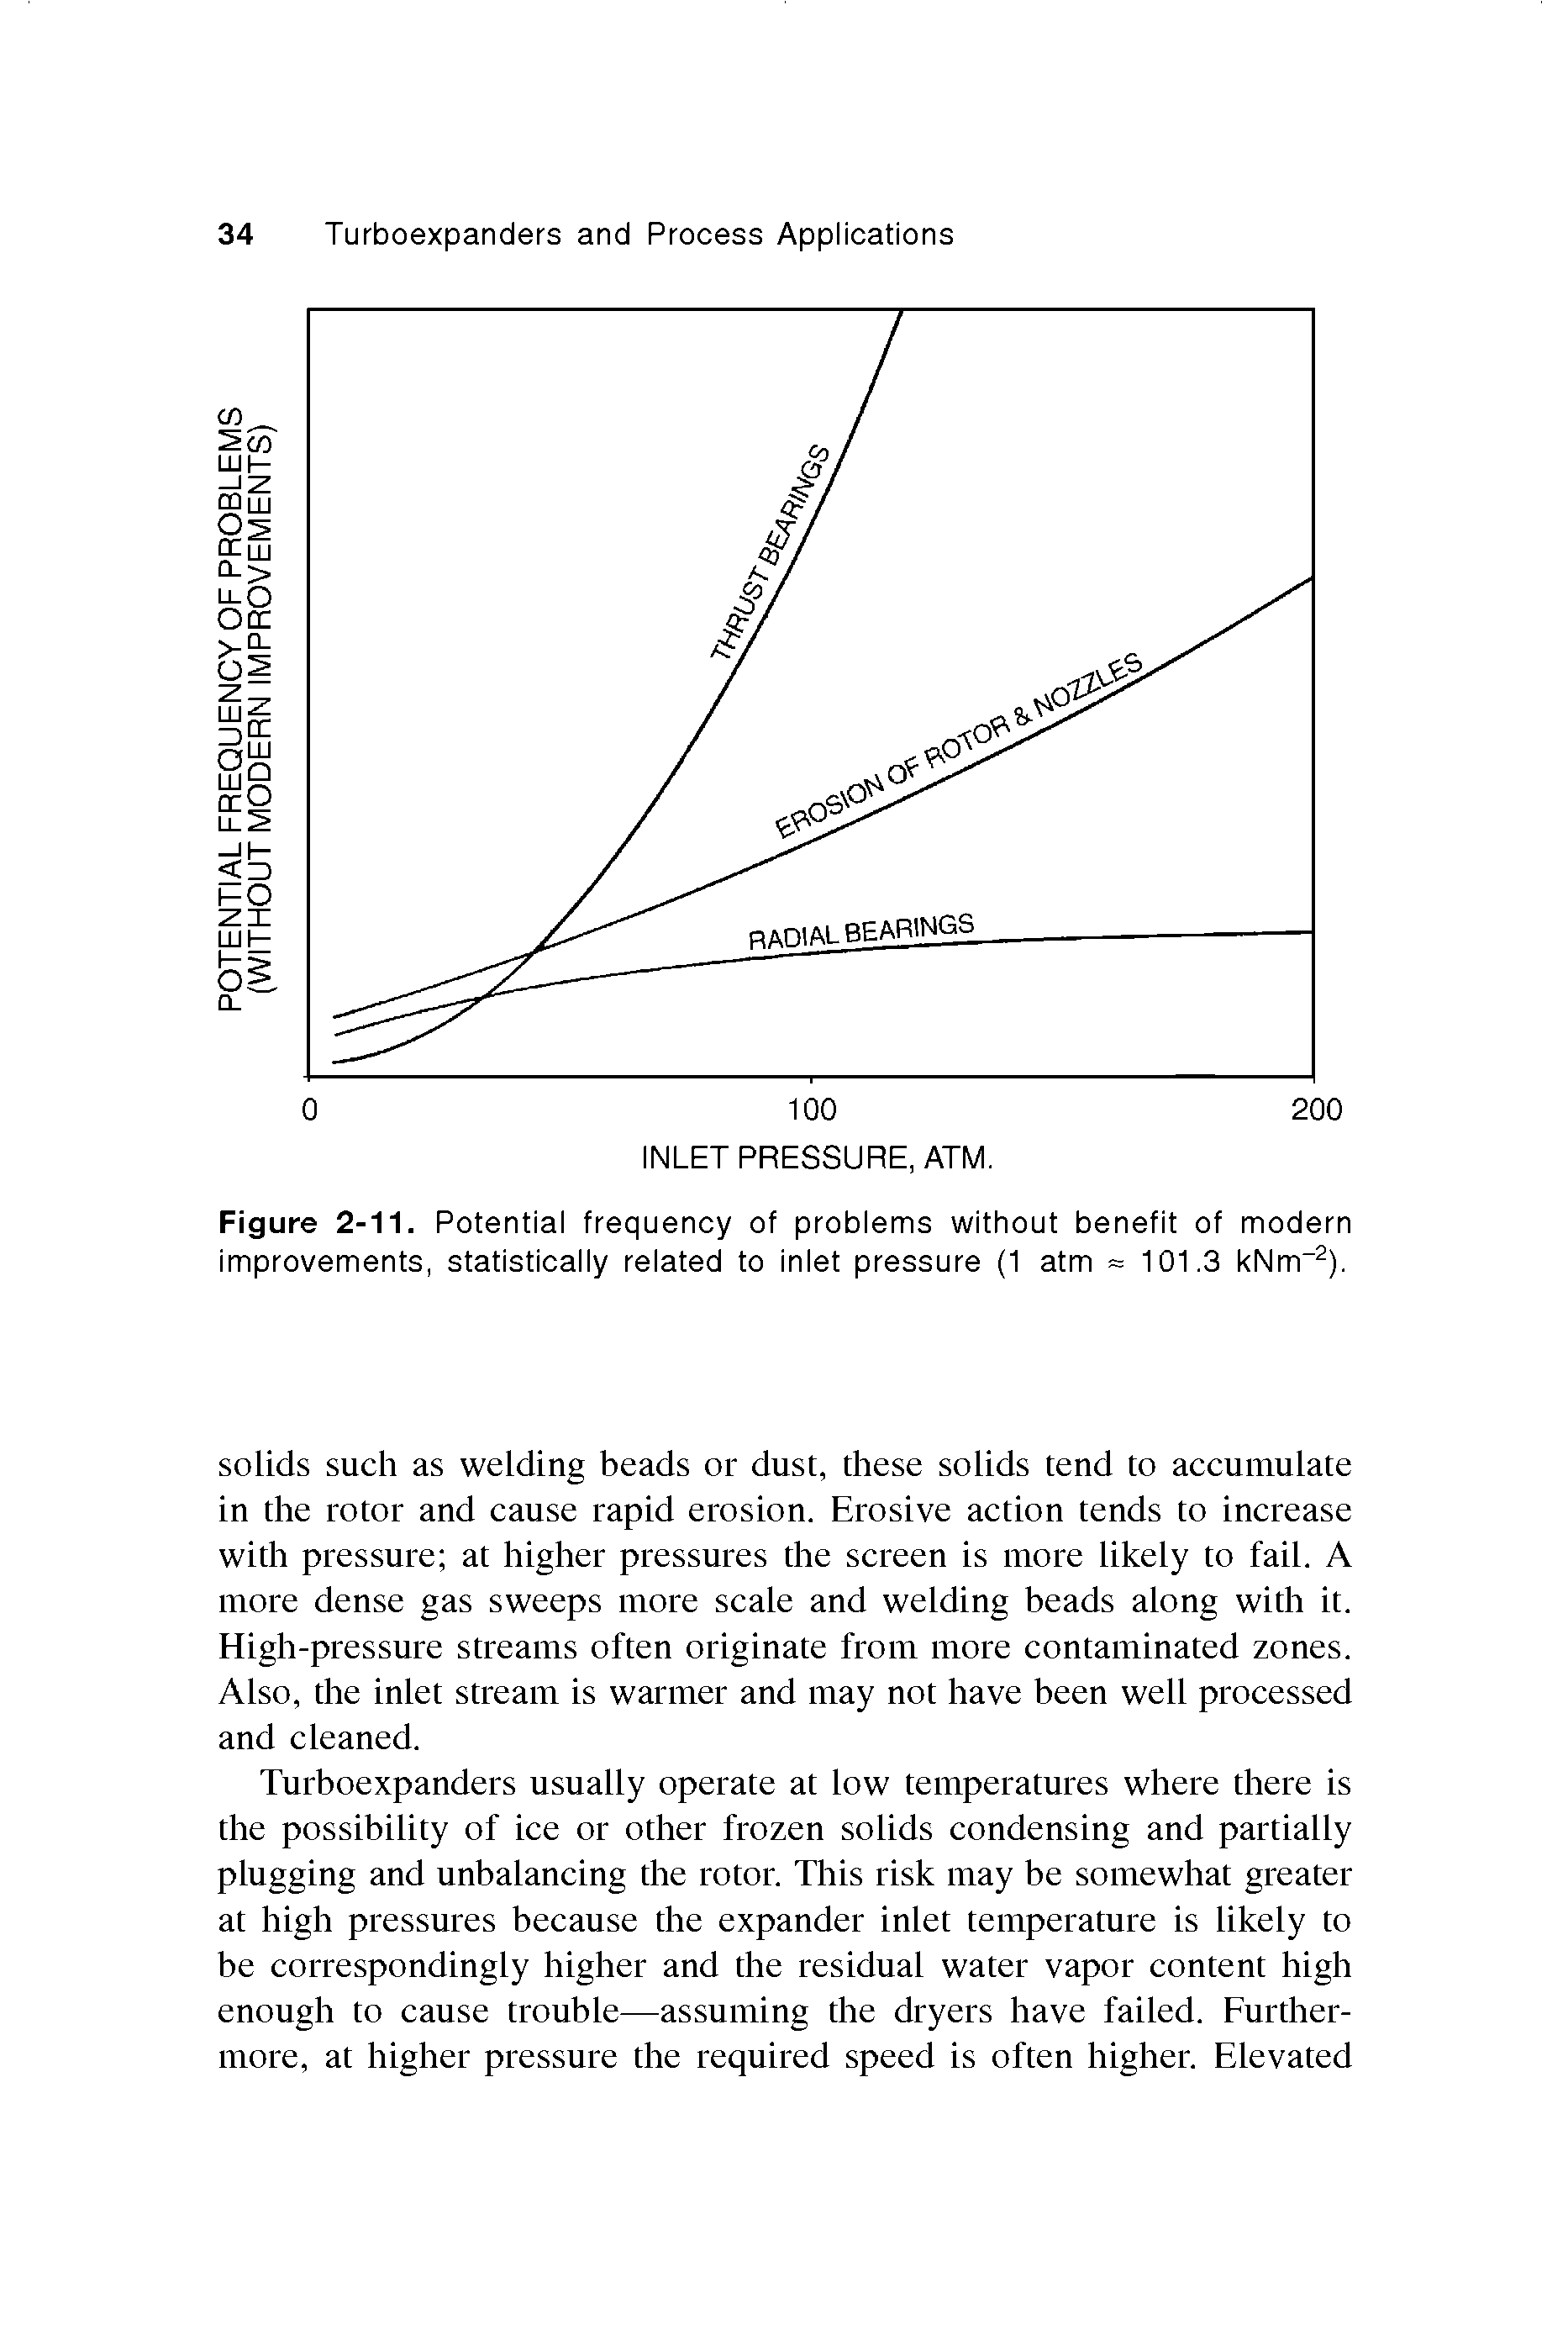 Figure 2-11. Potential frequency of problems without benefit of modern improvements, statistically related to inlet pressure (1 atm = 101.3 kNm ).